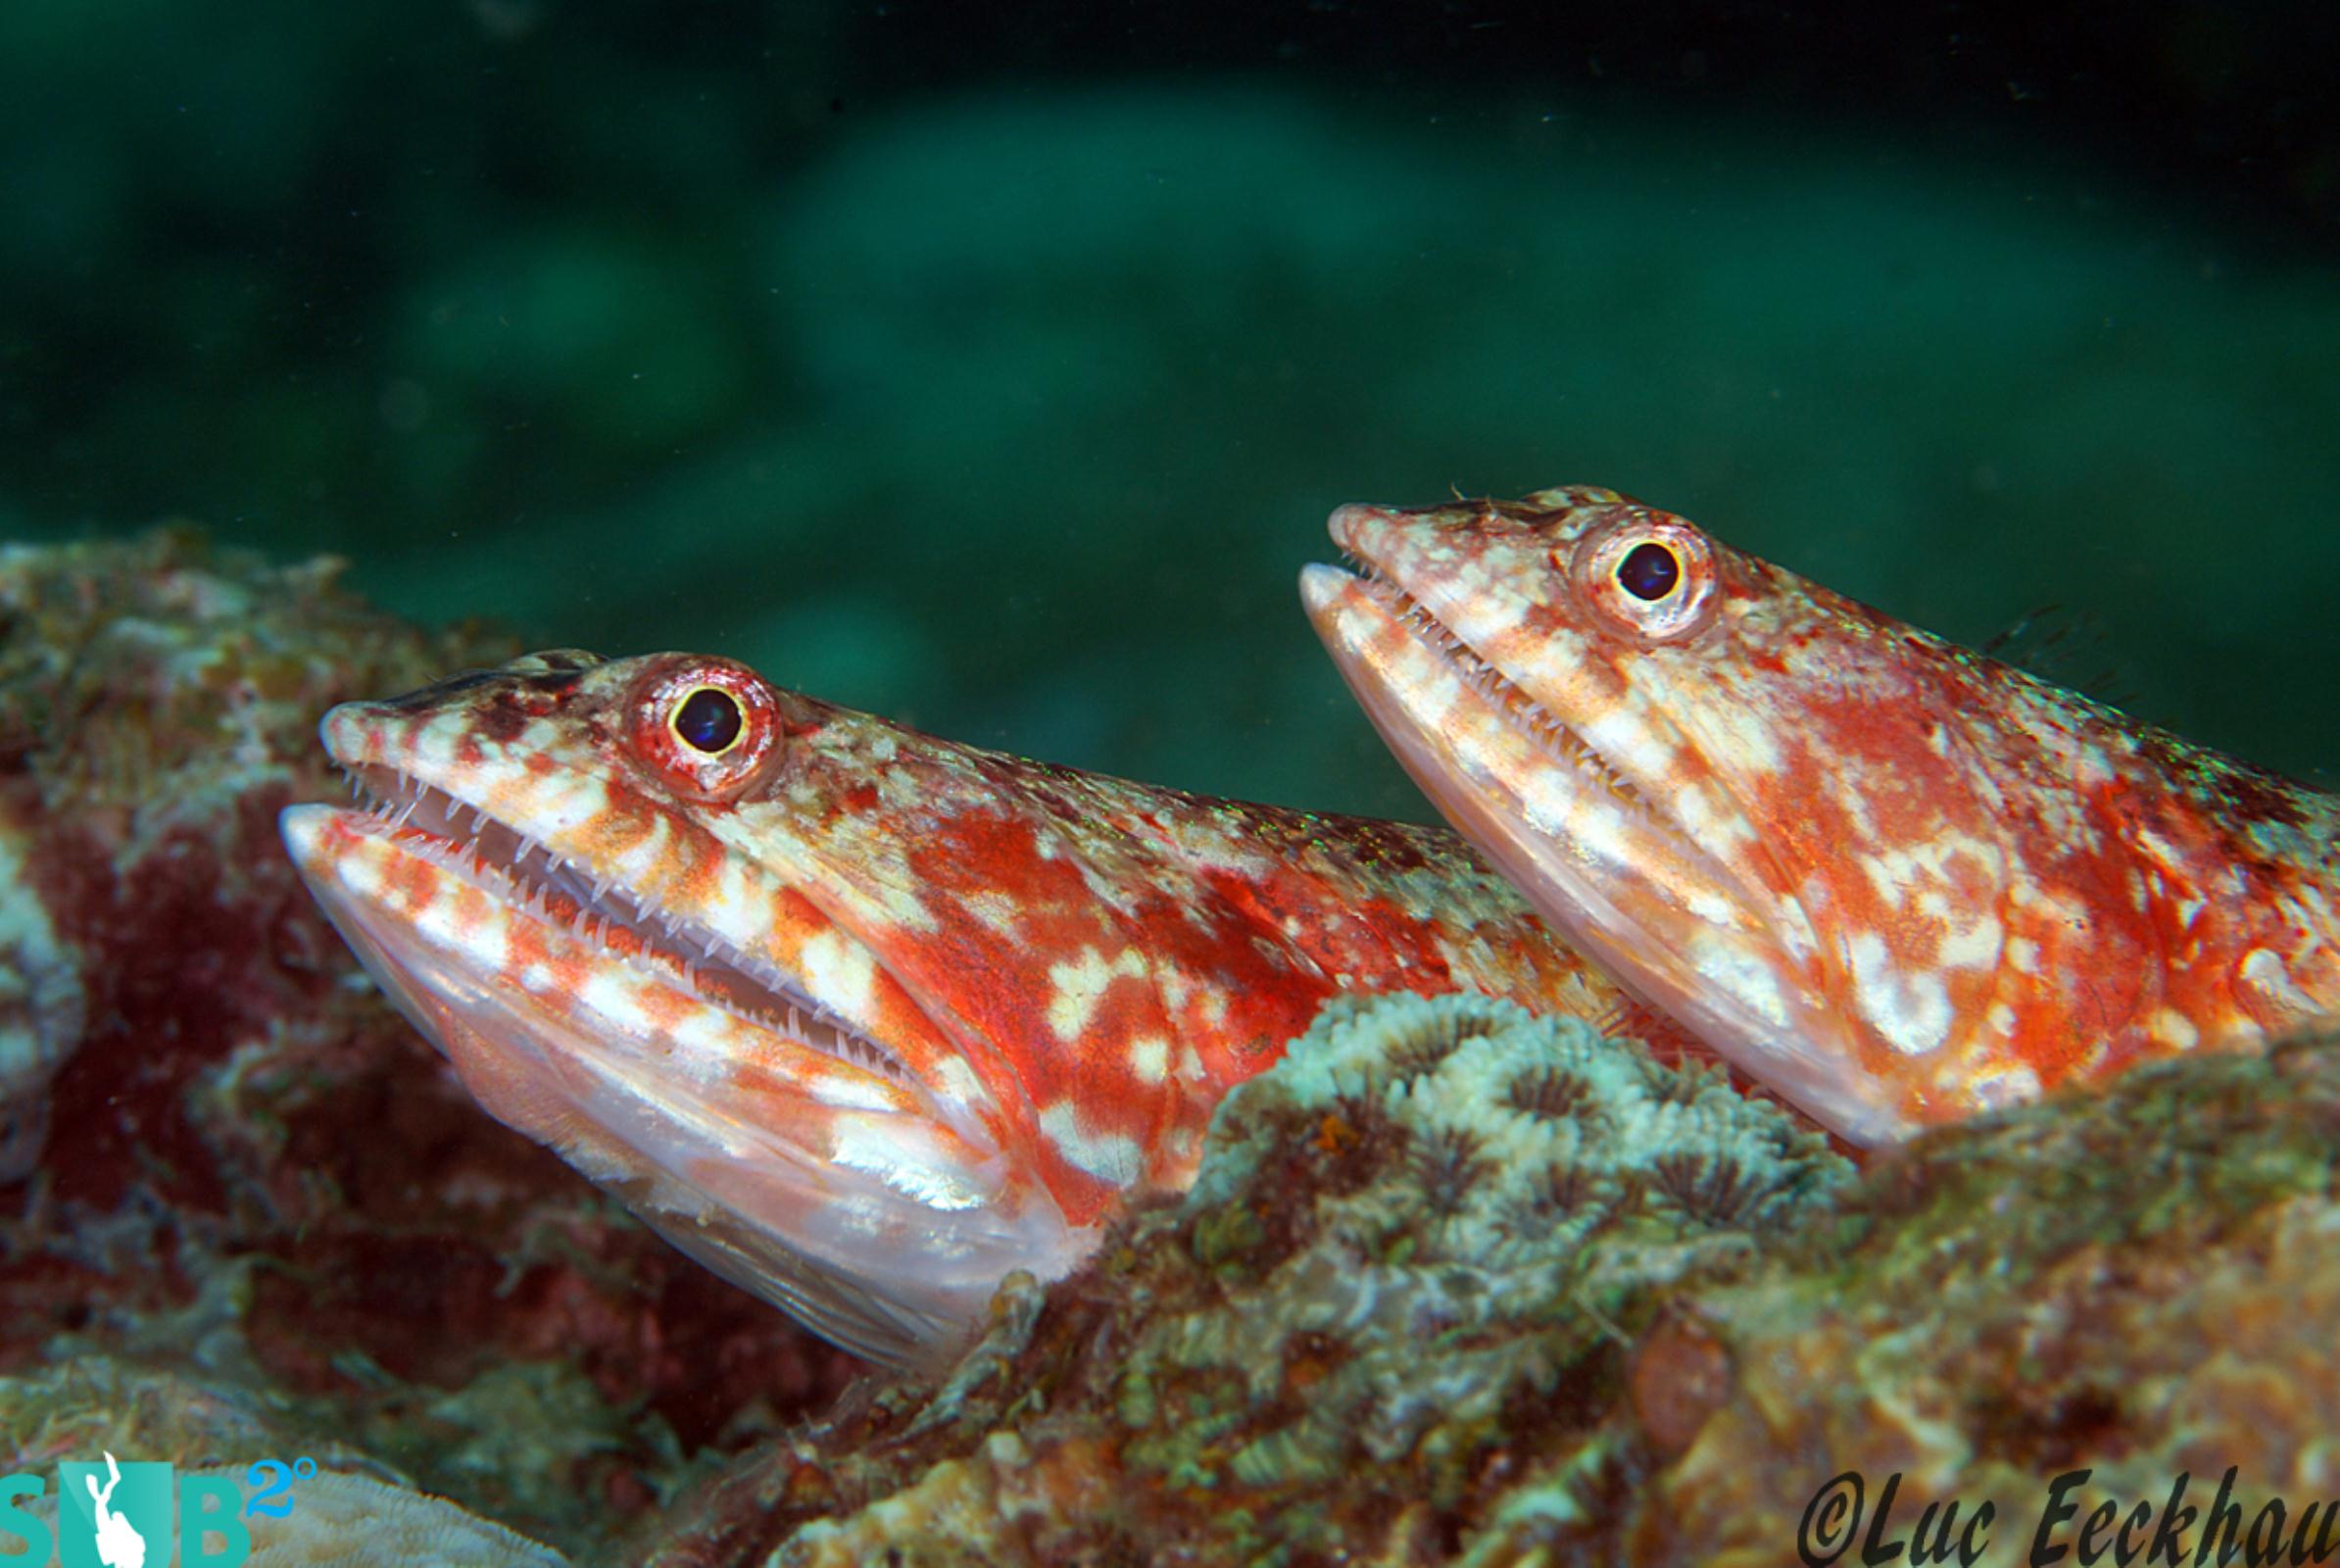 Two beautiful lizardfish resting together, just waiting for something to swim by.